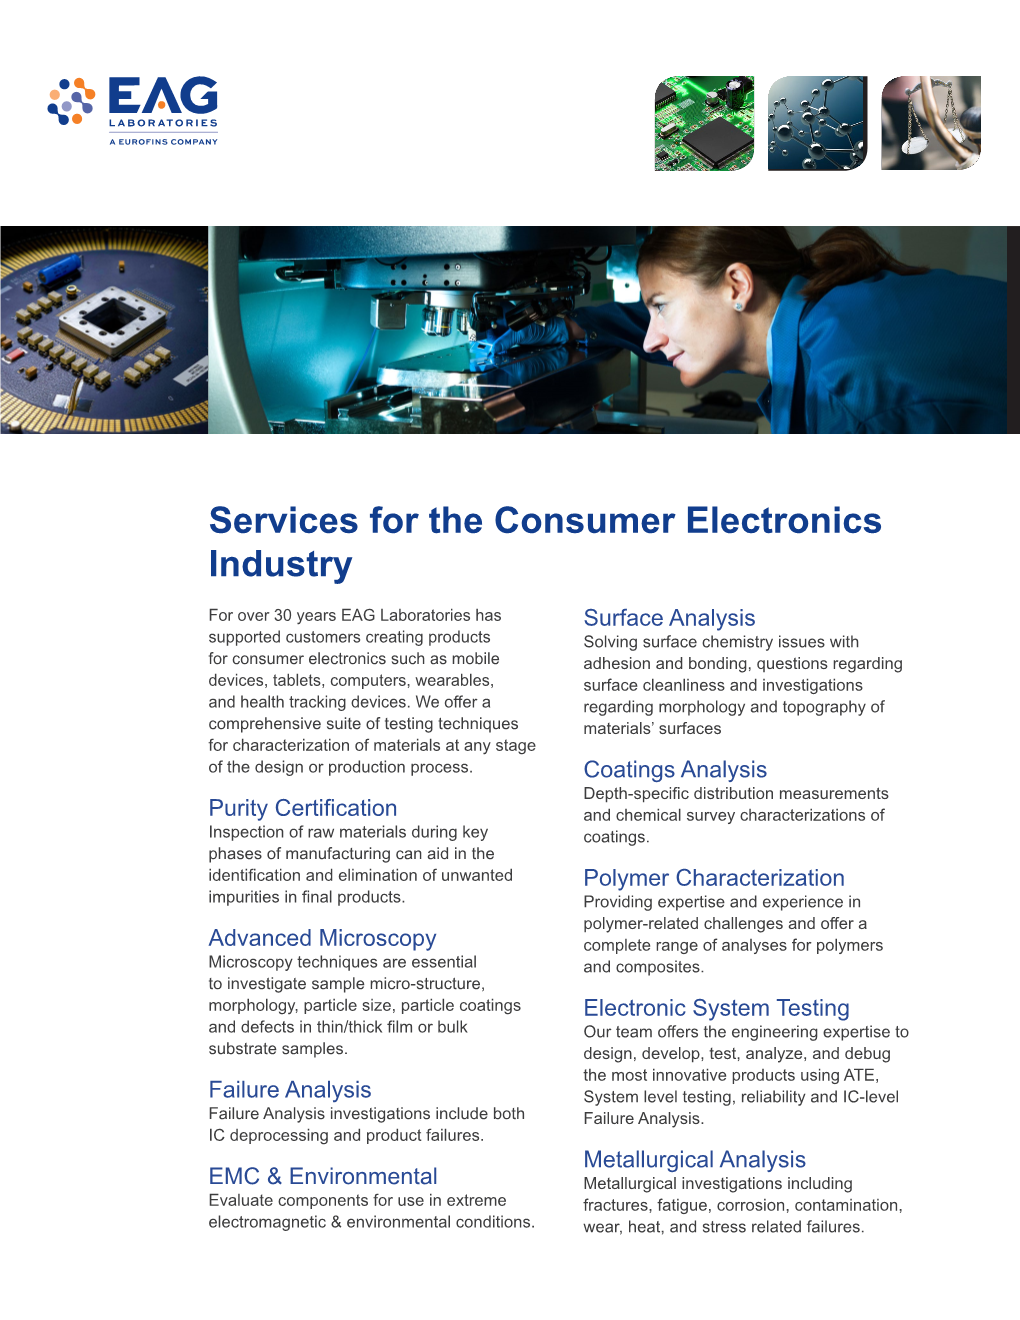 Services for the Consumer Electronics Industry